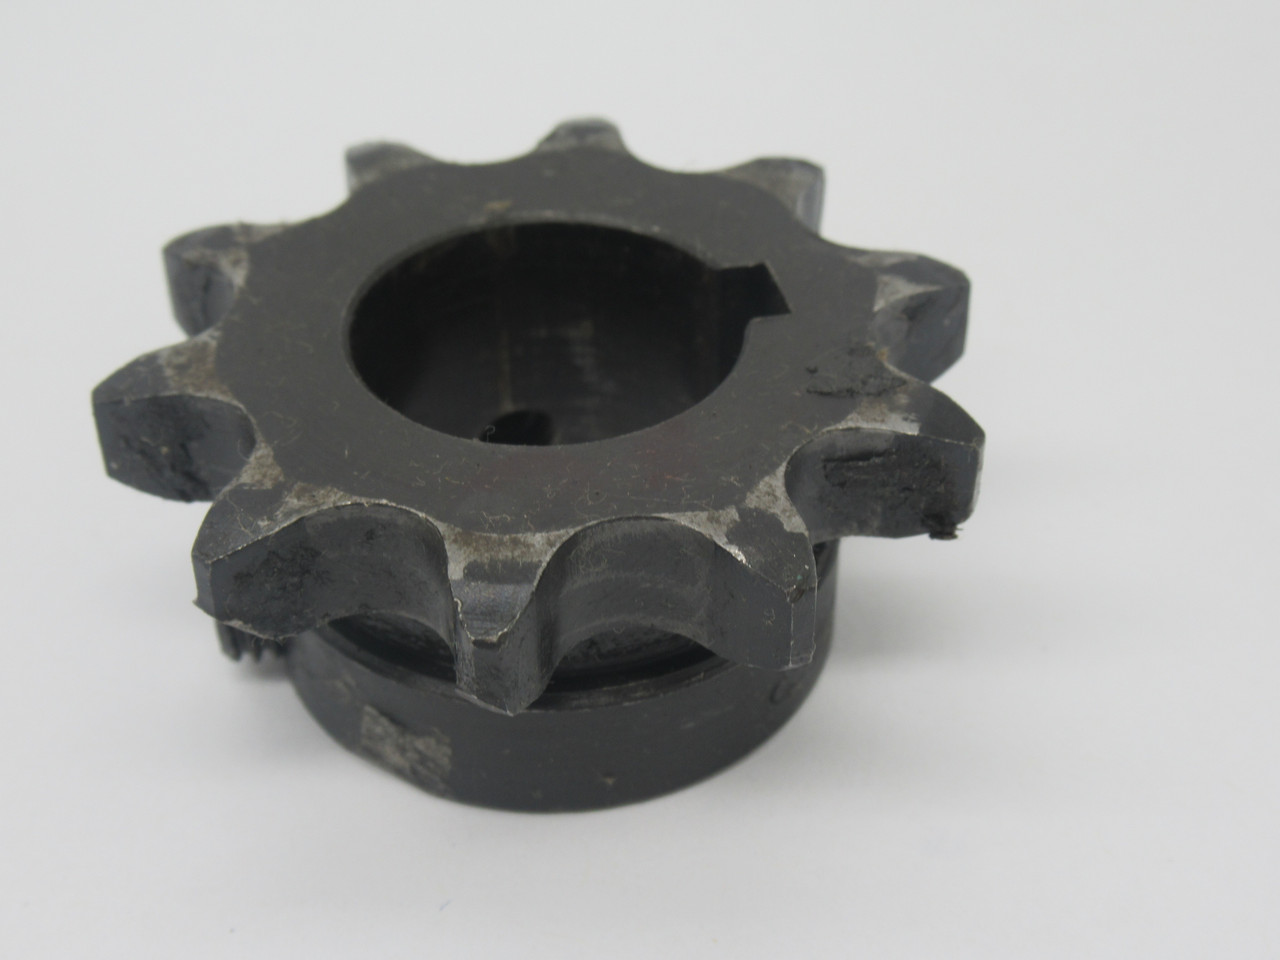 Generic 50B10F1 Roller Chain Sprocket 1" Bore 10 Teeth 50 Chain 5/8" Pitch USED